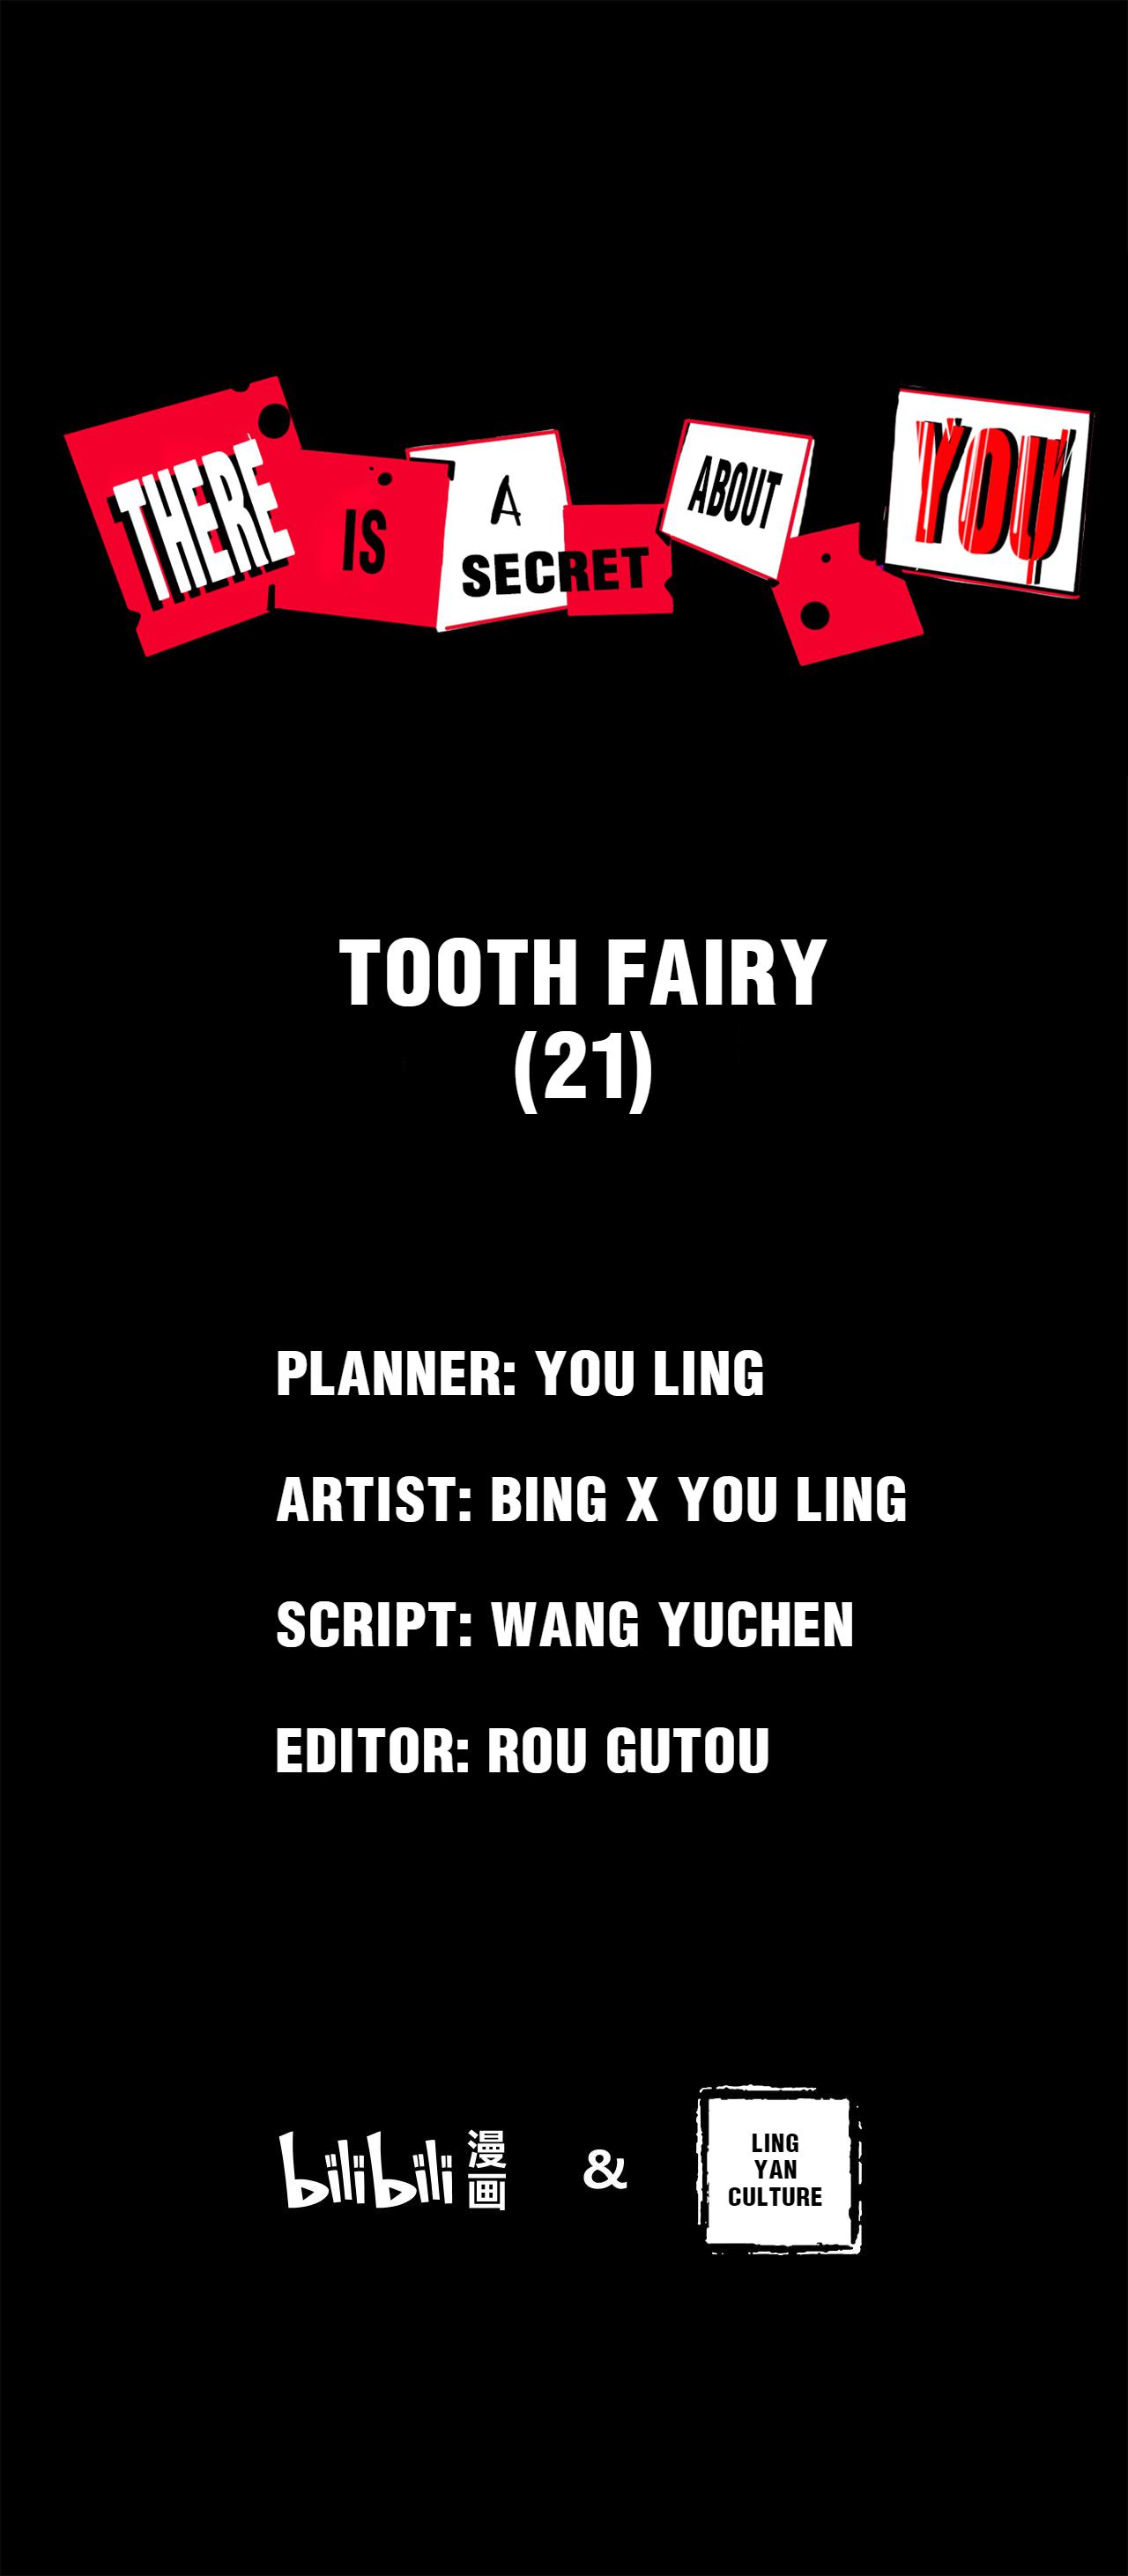 There is a Secret About You 21 Tooth Fairy (21)